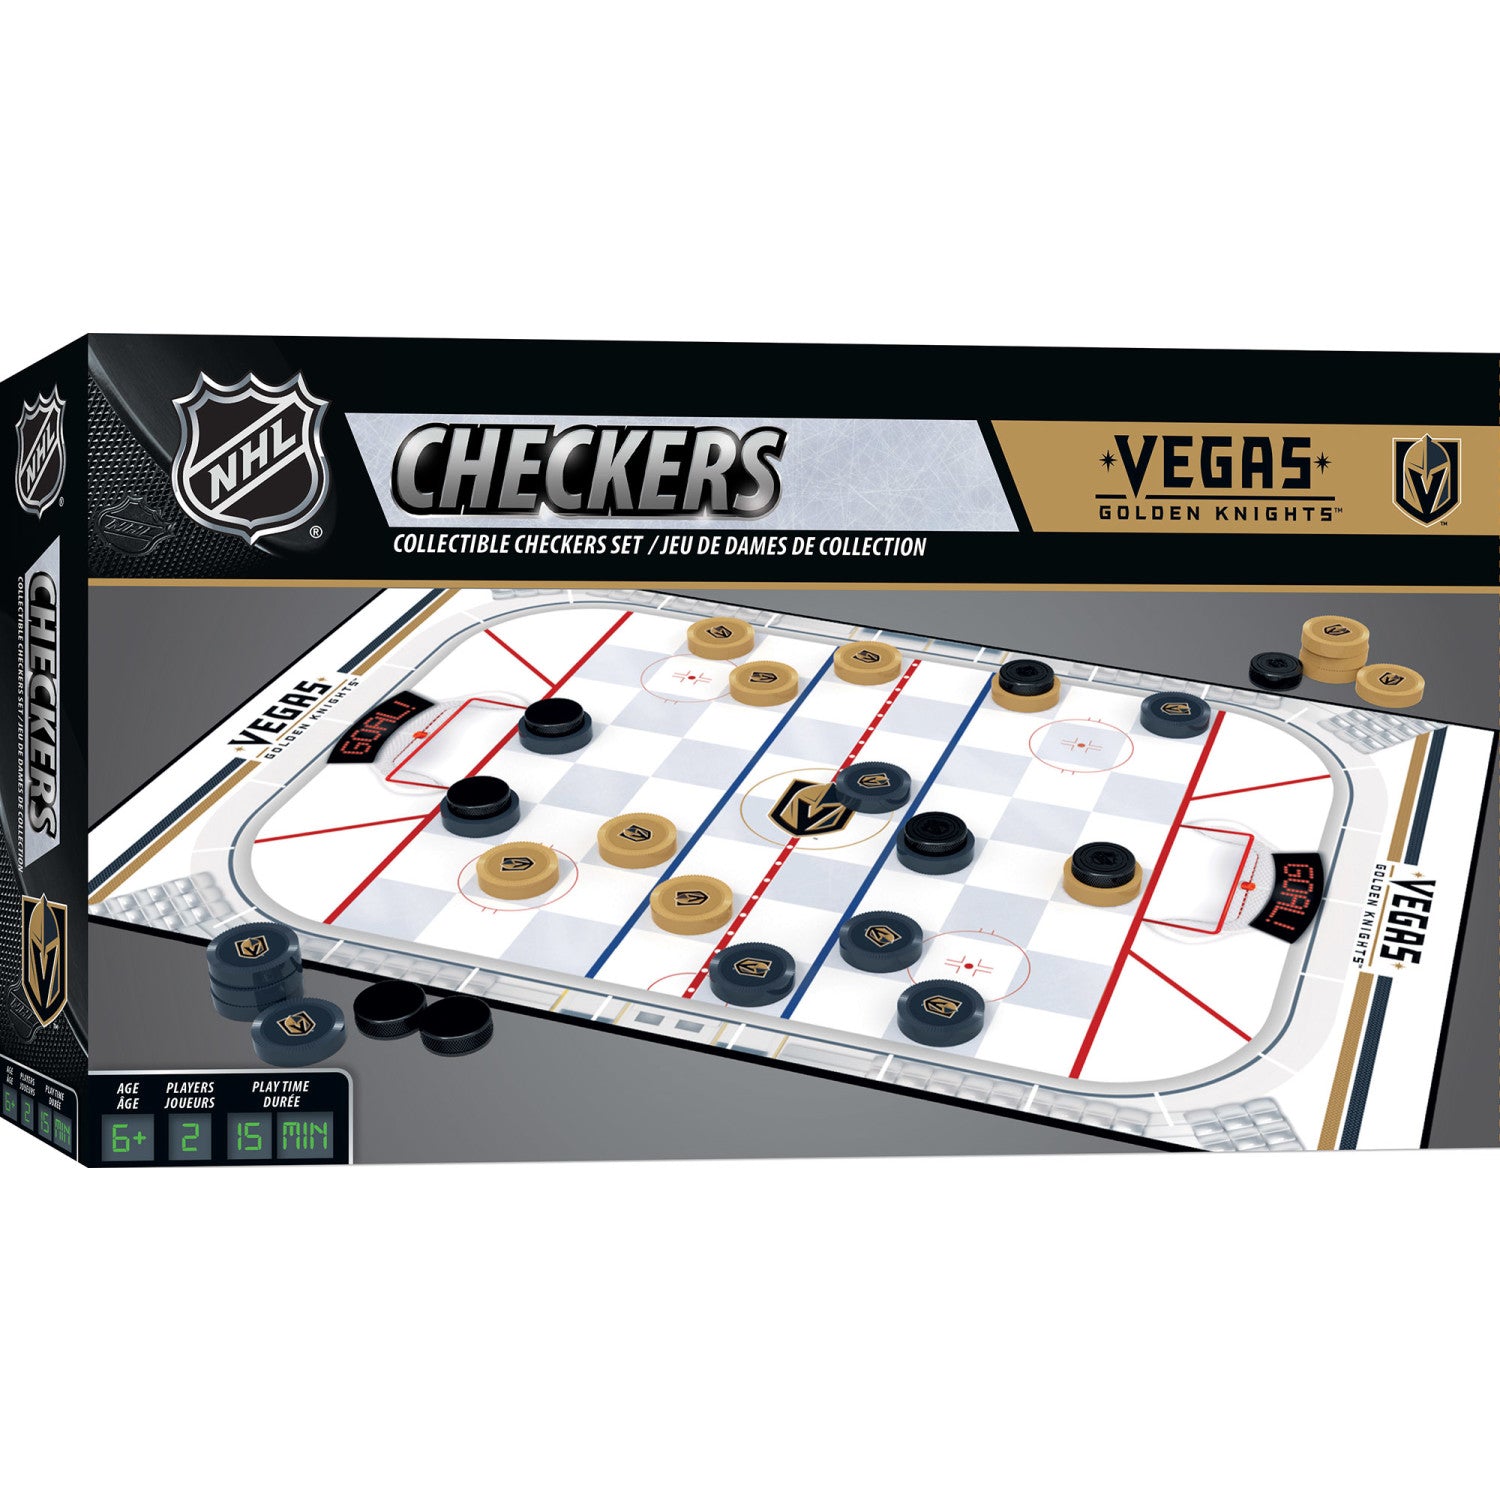 Las Vegas Golden Knights Checkers Board Game